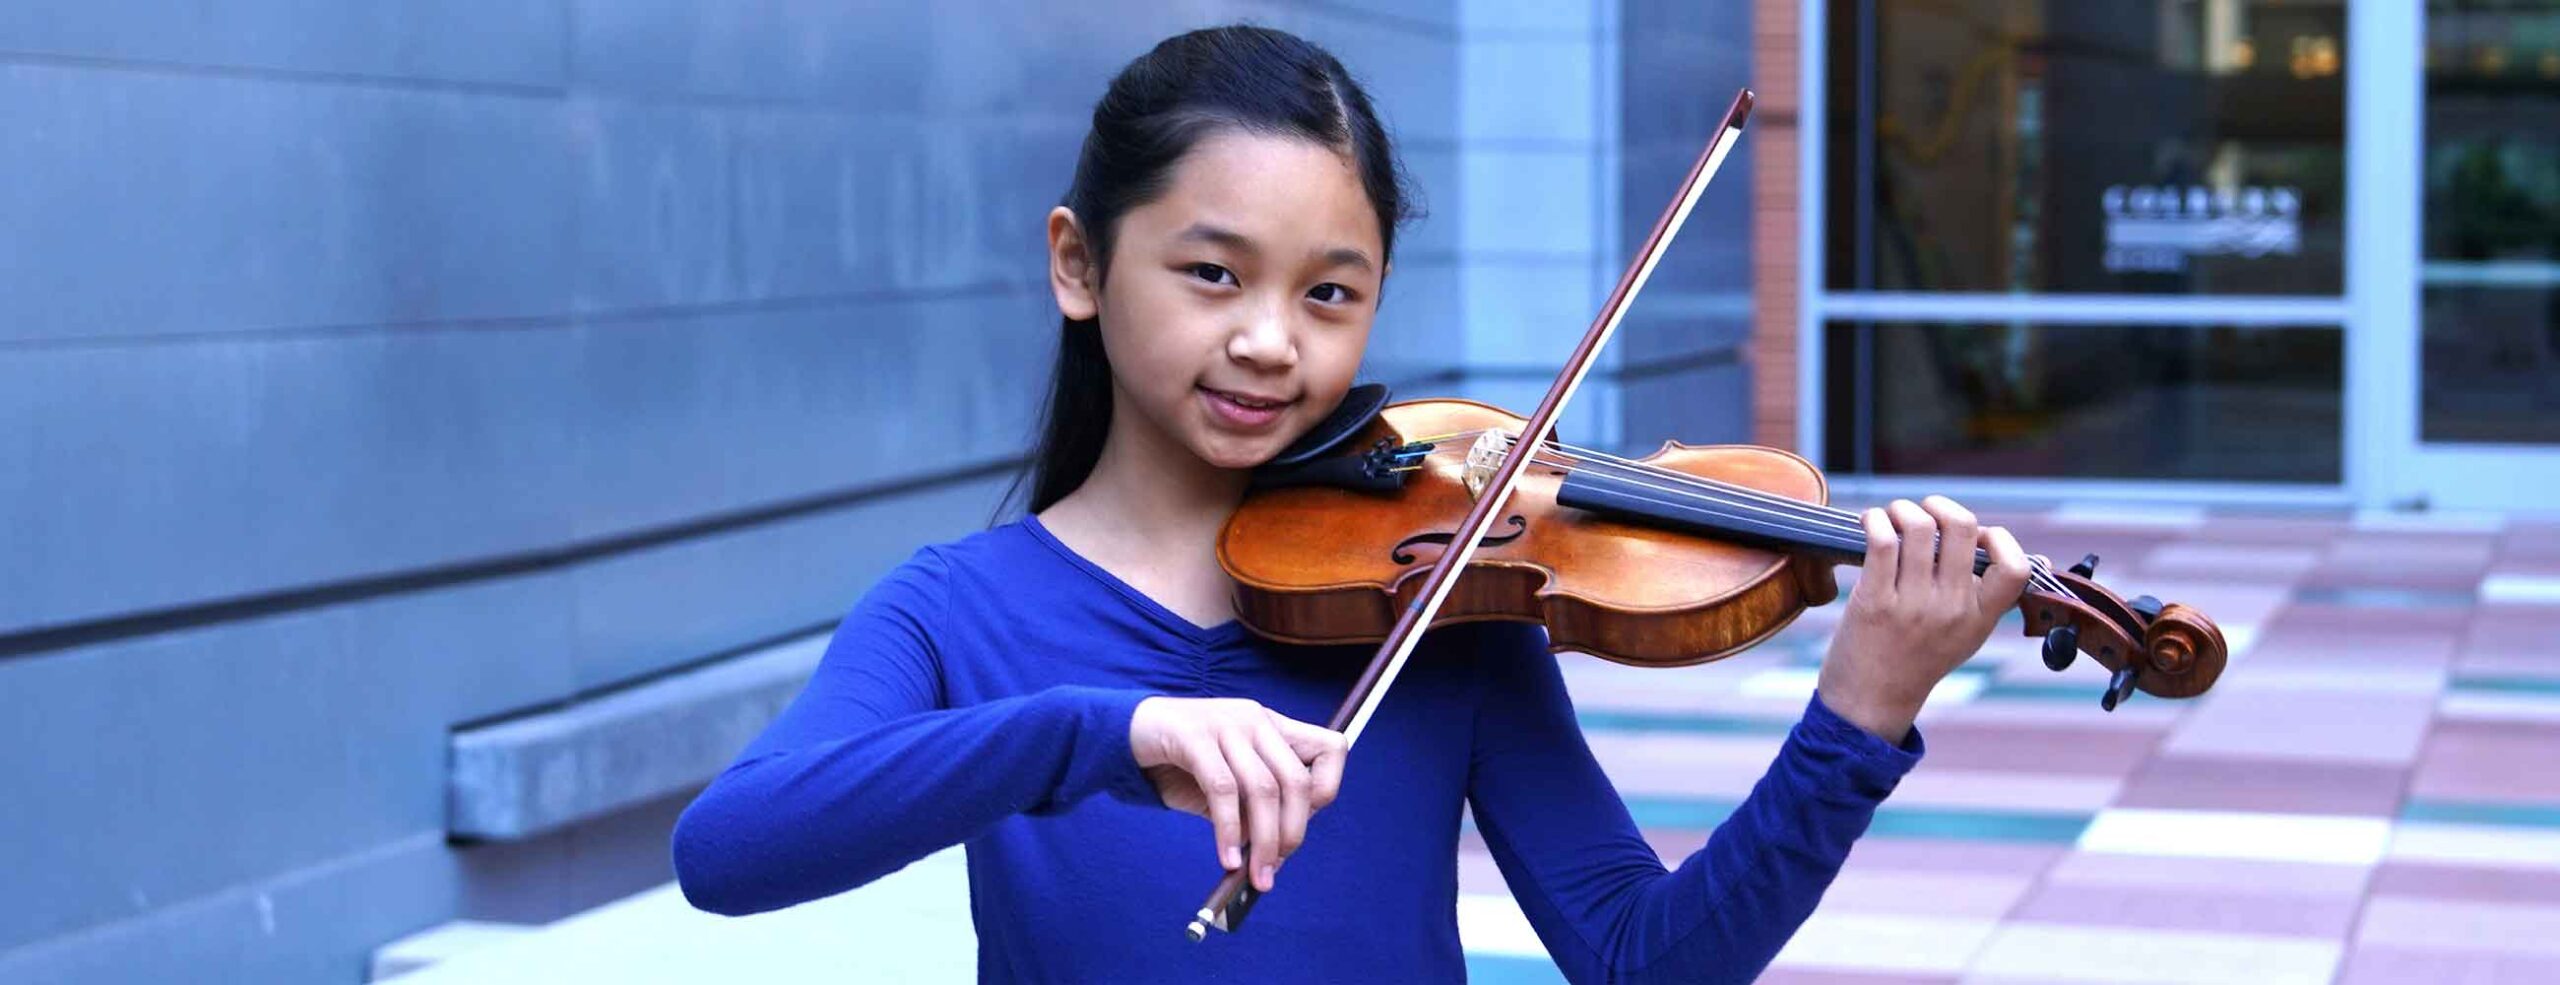 Young violinist standing on plaza